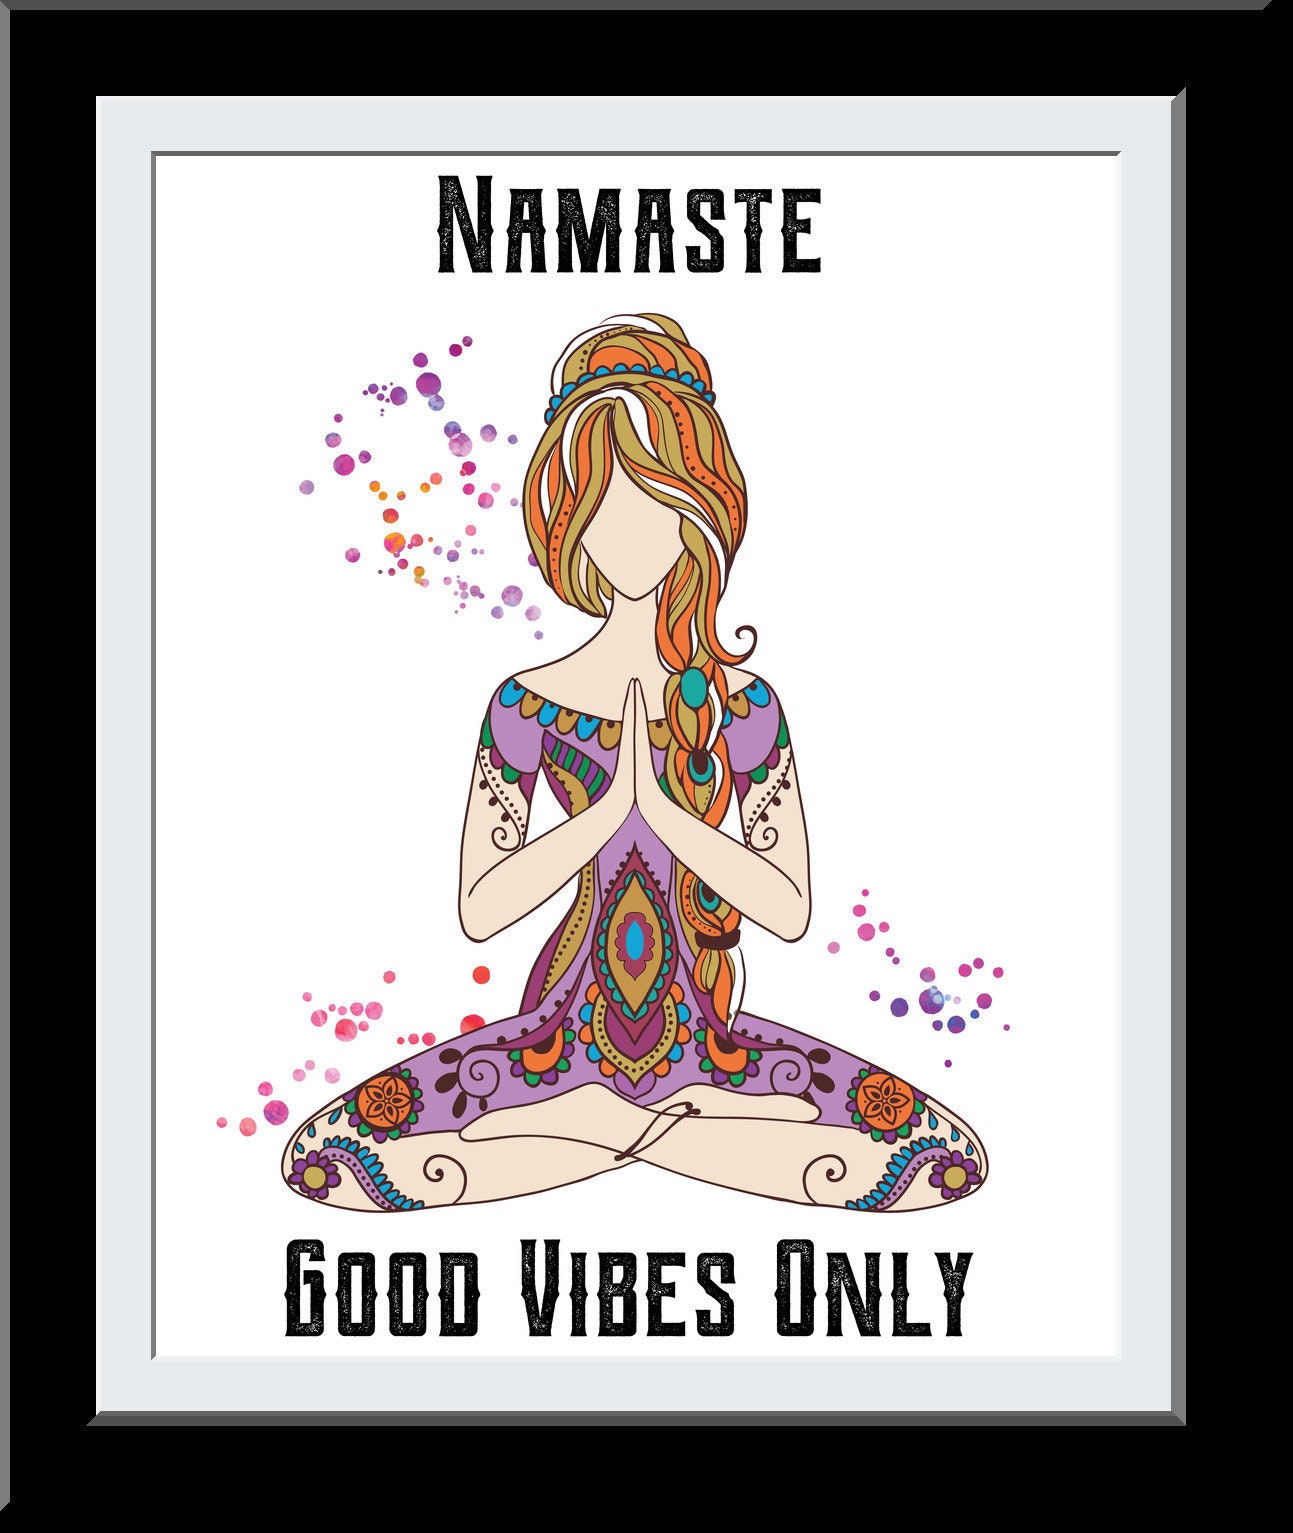 Good Vibes Only Namaste Yoga Art Positive Gifts for Women Teens  Motivational Inspirational Dragonfly Quotes -  Canada